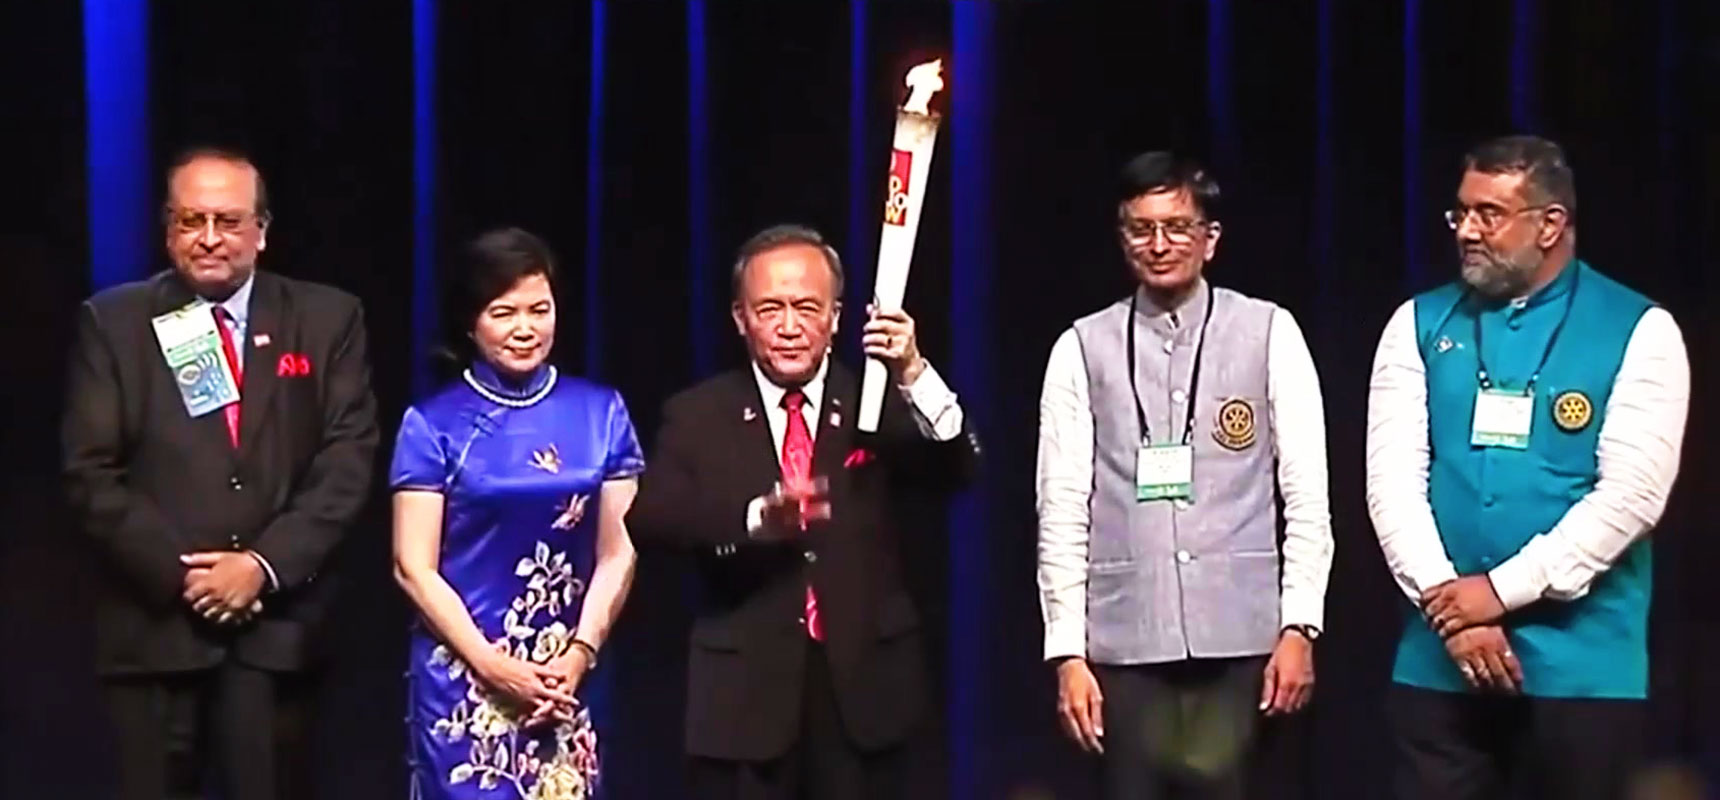 RI President Gary Huang holds aloft the Polio Flame at the Sao Paulo Convention in 2015. From L: PRID P T Prabhakar, RC Madras president S N Srikanth and secretary N K Gopinath.